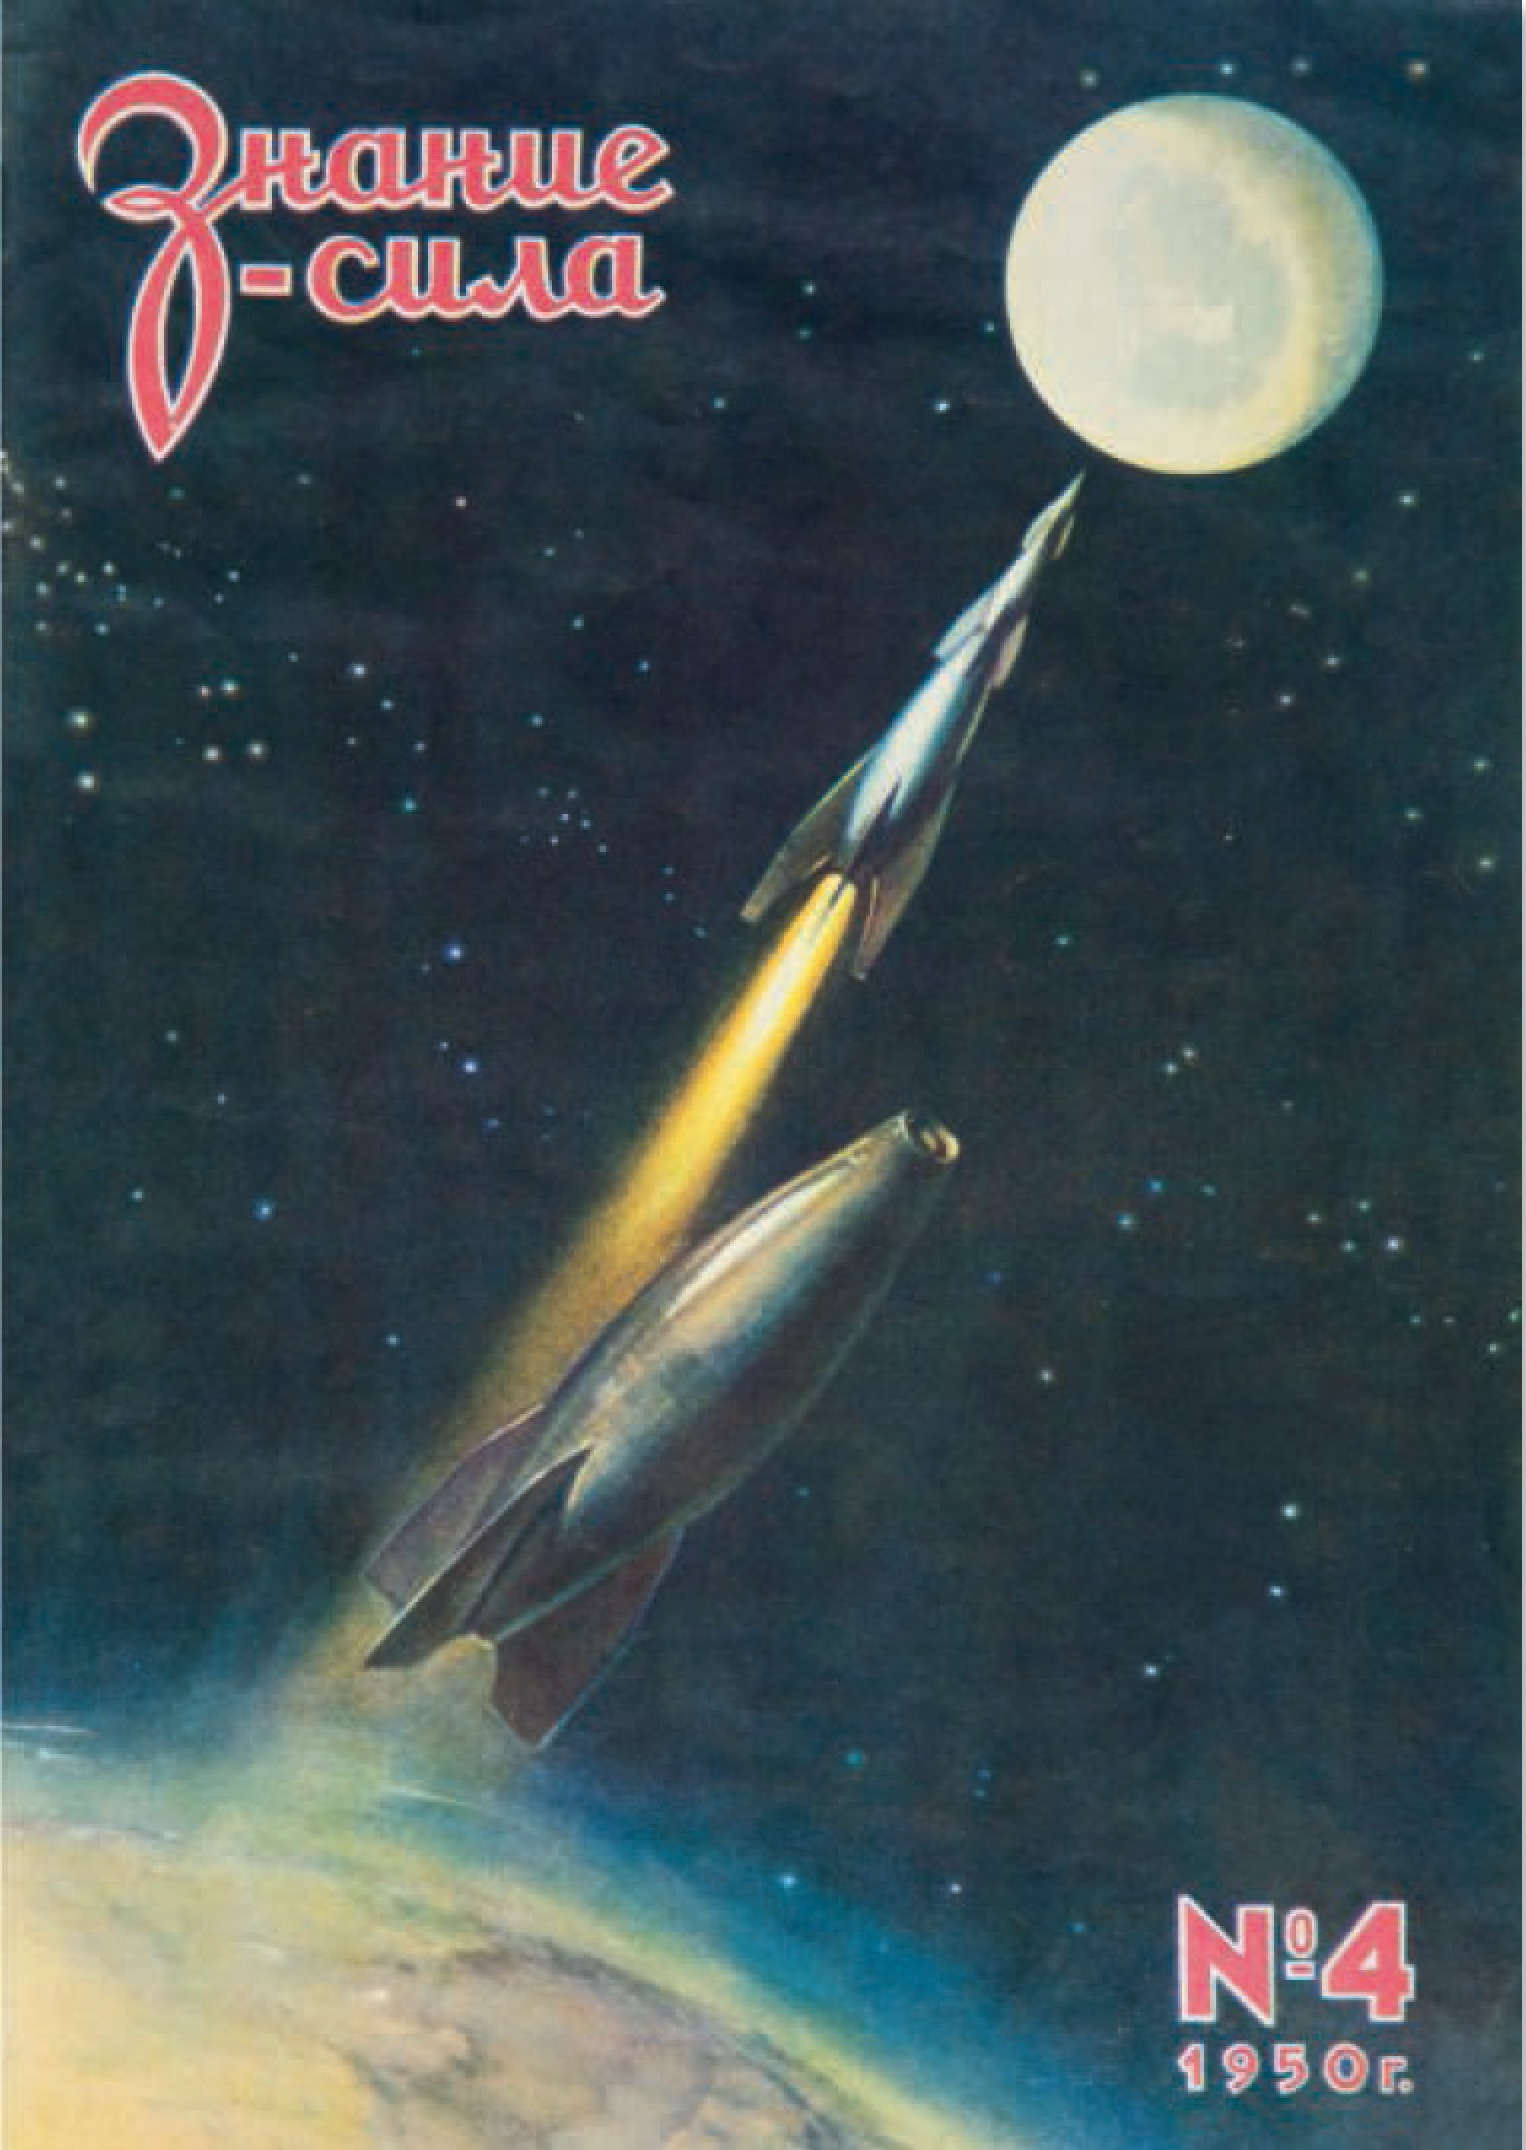 Knowledge is Power, issue 4, 1950, illustration by K. Artseulov for the article ‘Road to the Stars’, detailing the work of legendary Russian rocket scientist Konstantin Tsiolkovsky.